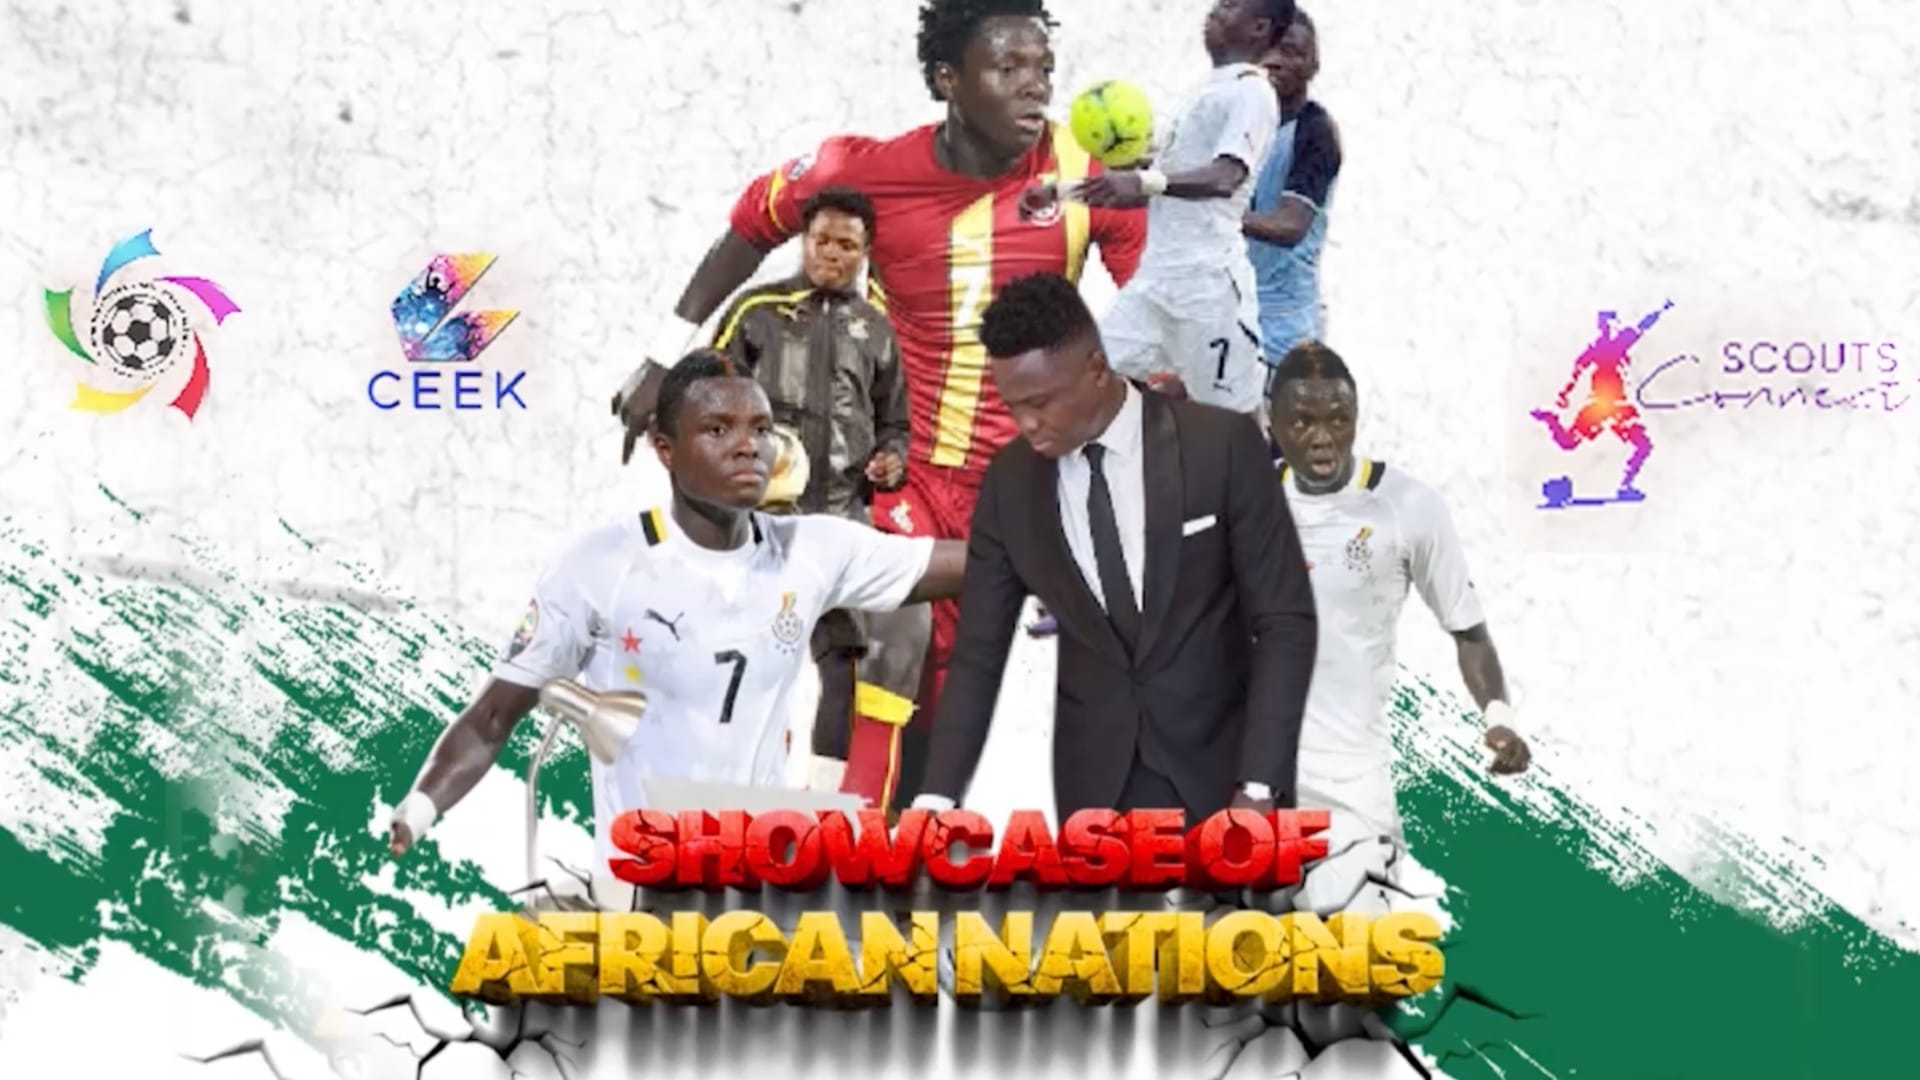 Showcase of African Nations Tournament Champions